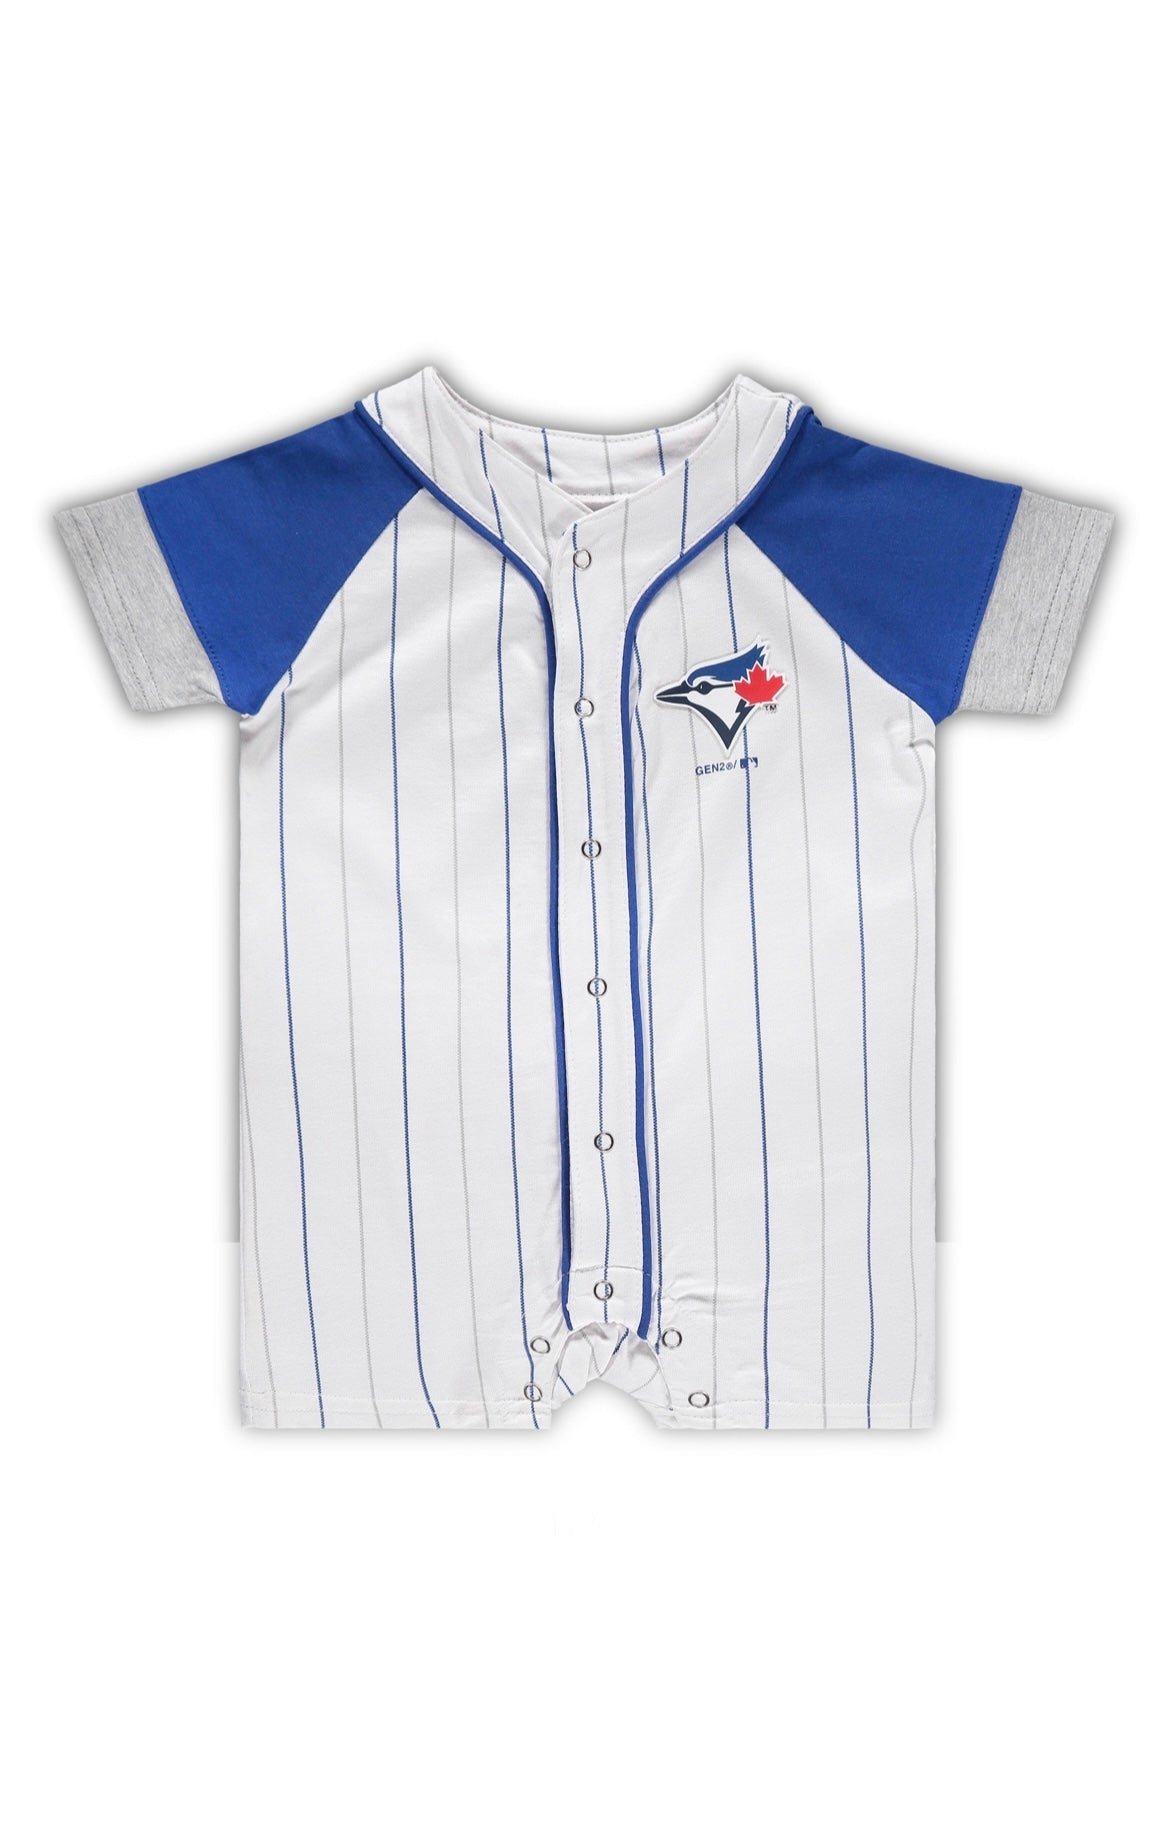 Does White Suitable For Kids Clothing? - Blue Jay